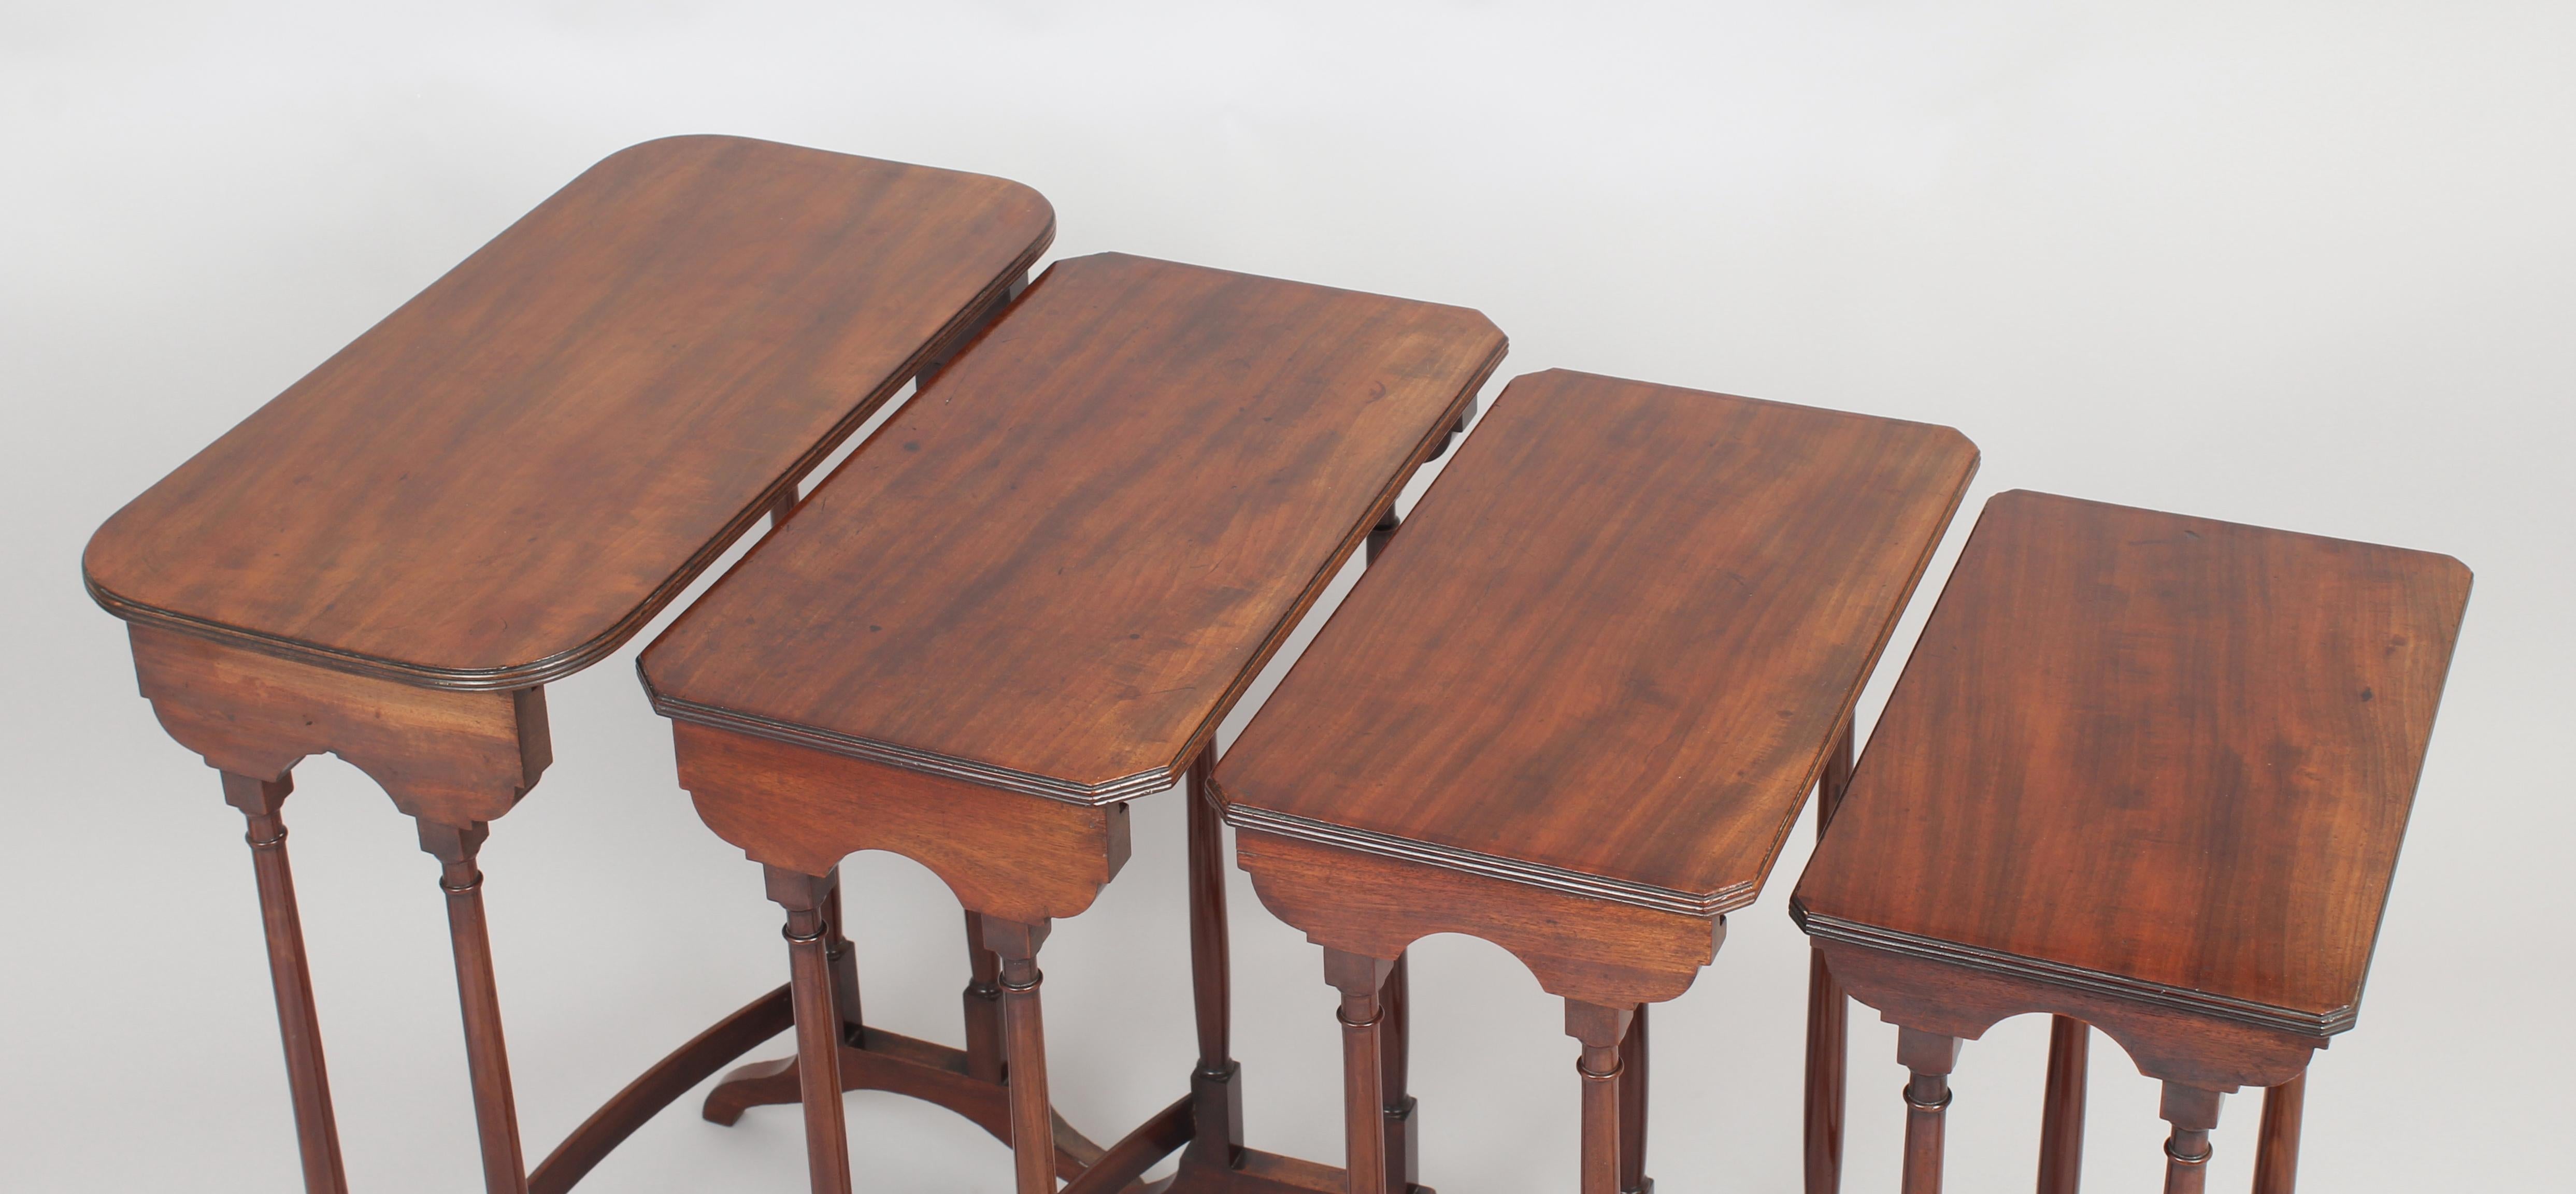 English Particularly Fine George III Period Mahogany Set of Quartetto Tables For Sale